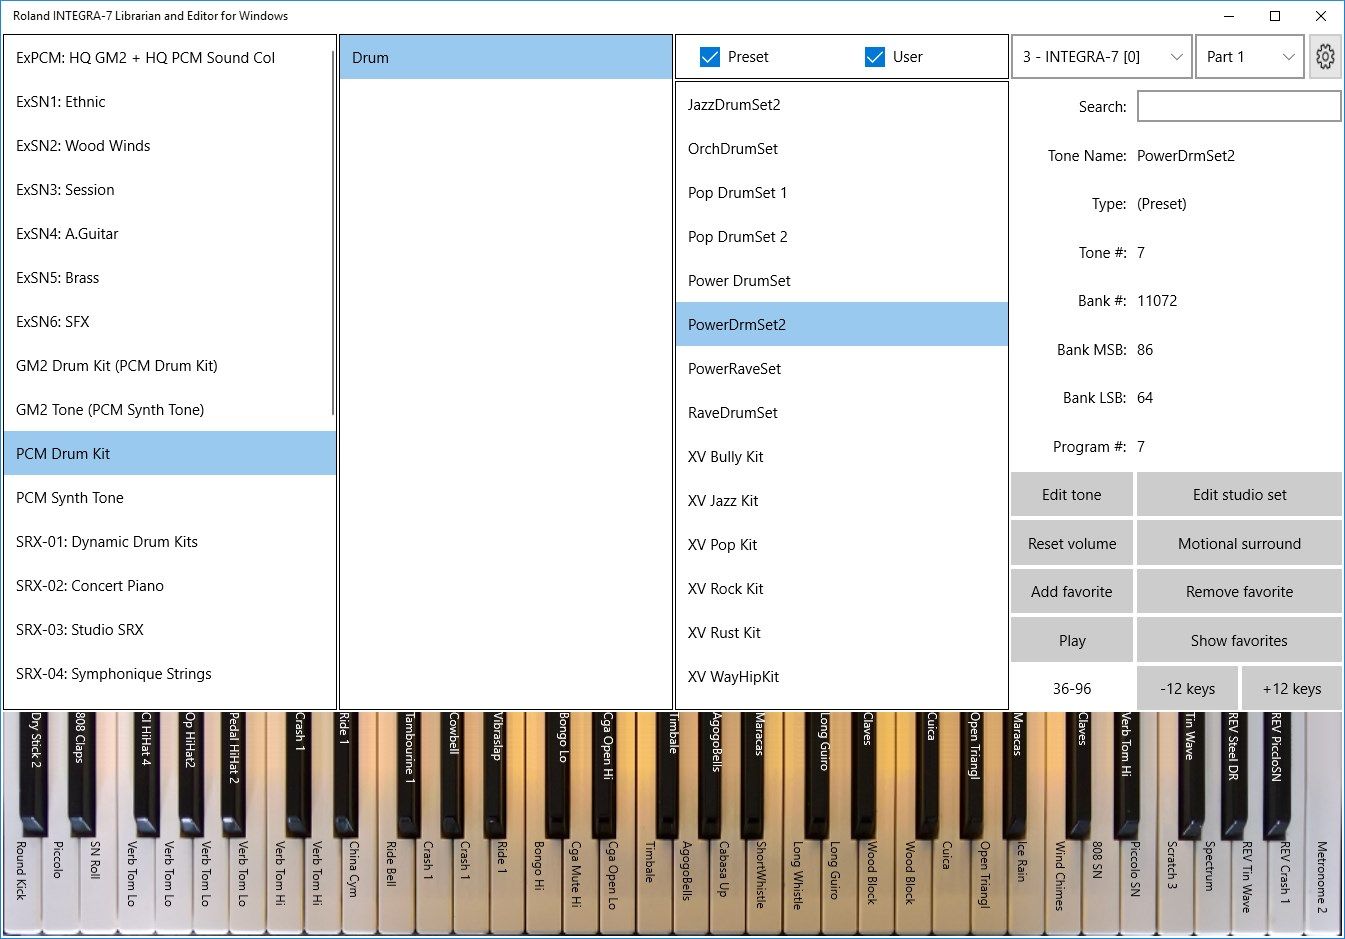 See drumset key assignments on keyboard